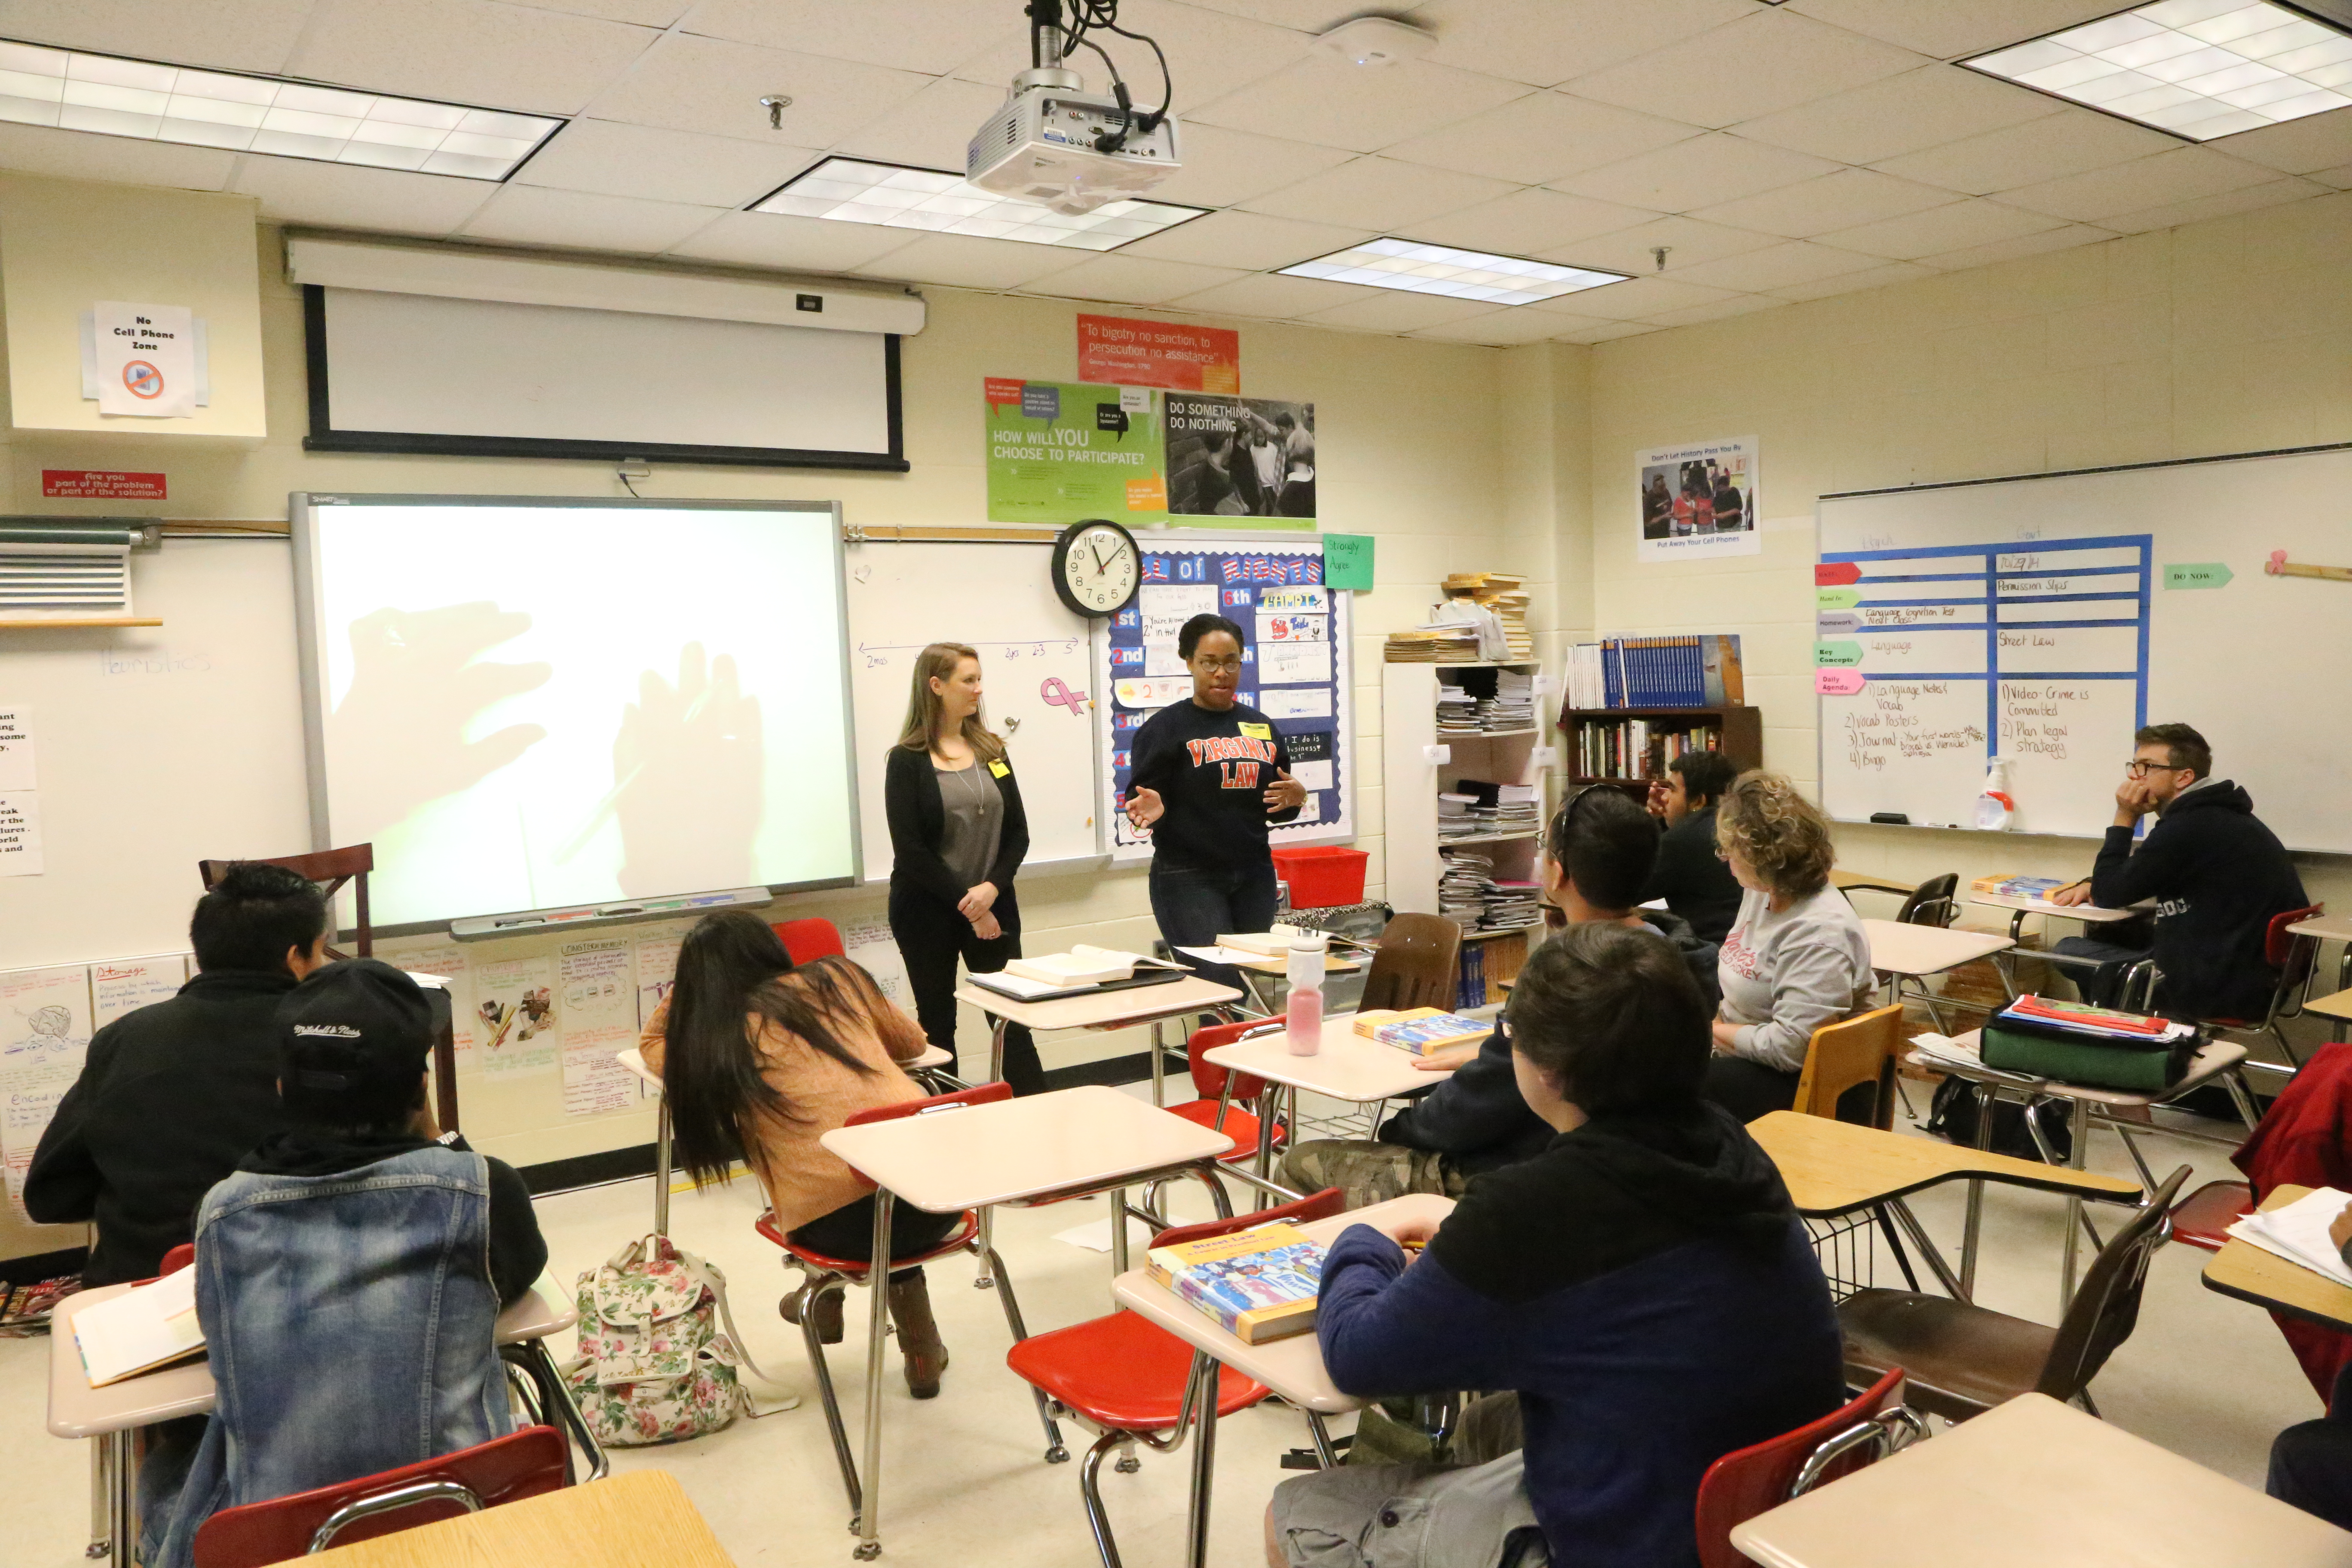 Arianna Lacerte and Jessica Douglas teach a group of middle school students